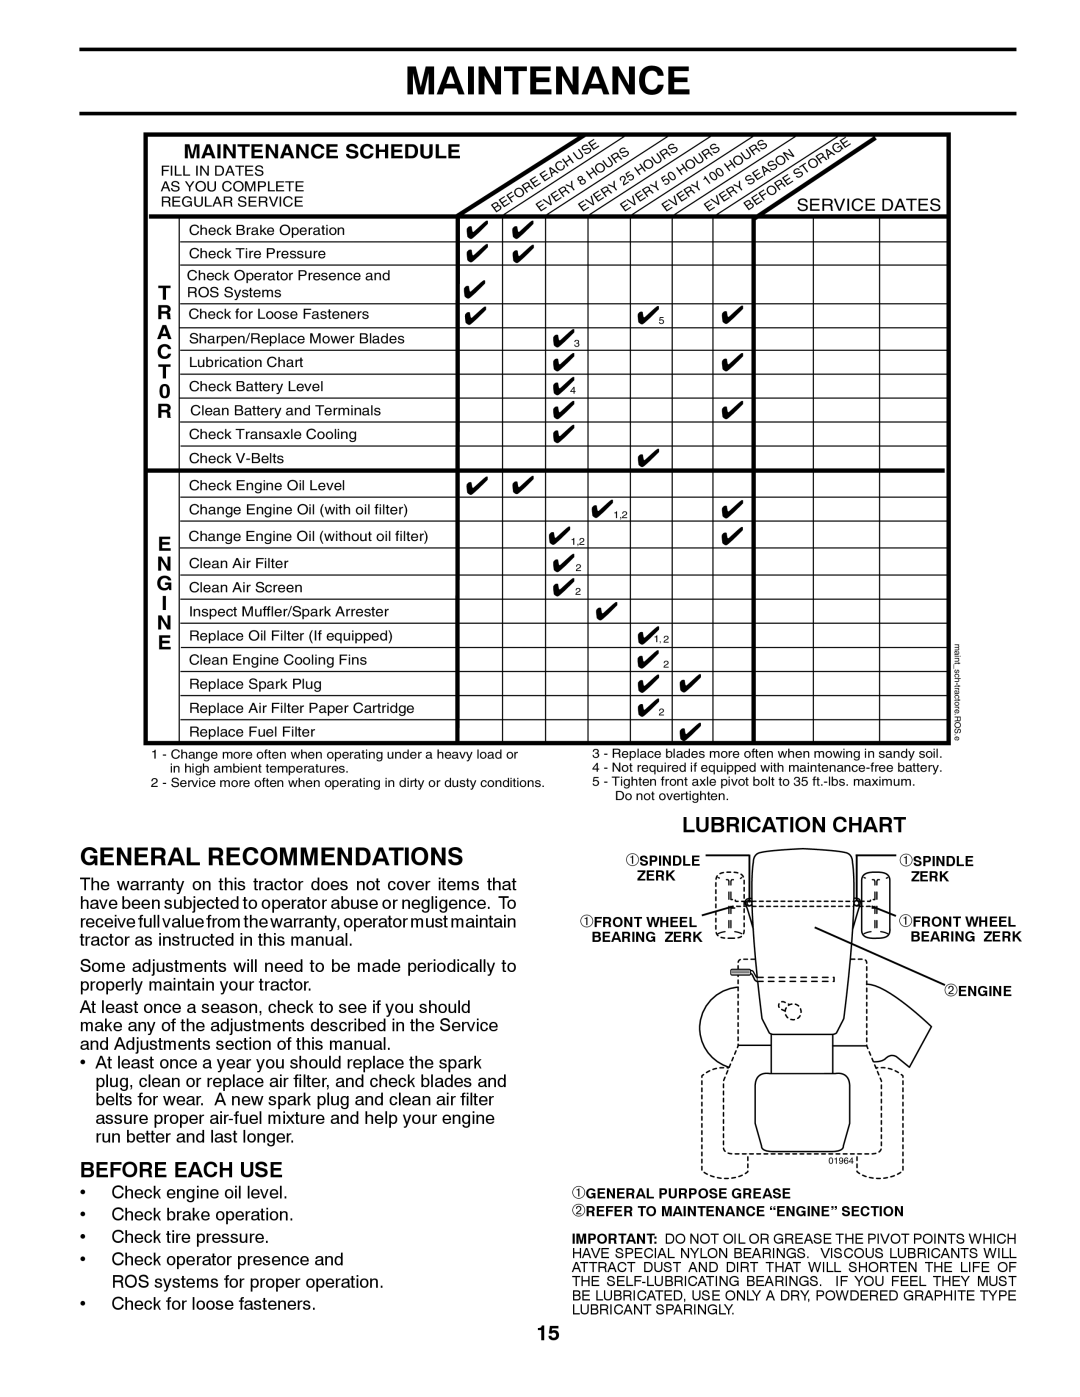 Husqvarna LTH1742TWIN manual Maintenance, General Recommendations, Lubrication Chart, Before Each Use 